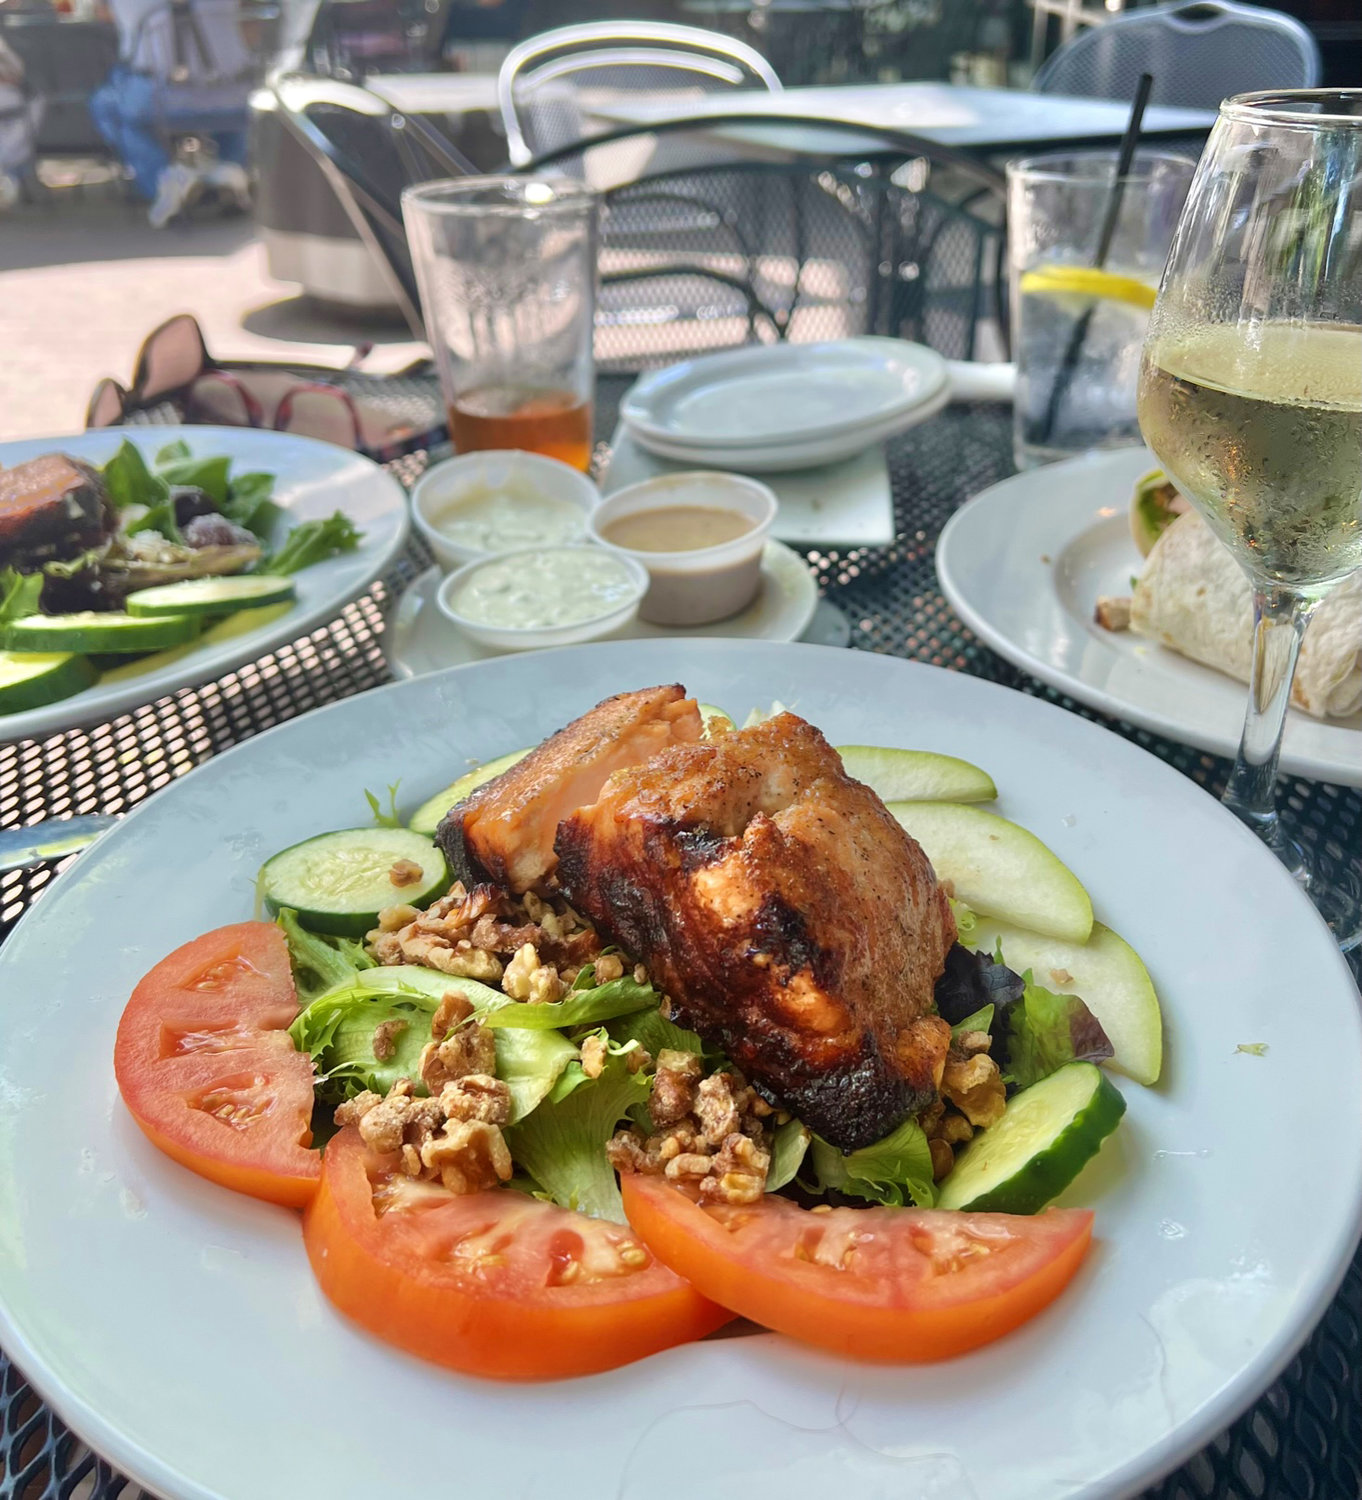 The Signature Salad is a delicious work of art, perfectly complemented with a refreshing glass of Riesling, at Pierro’s Italian Bistro. Photo by Janet Gibson